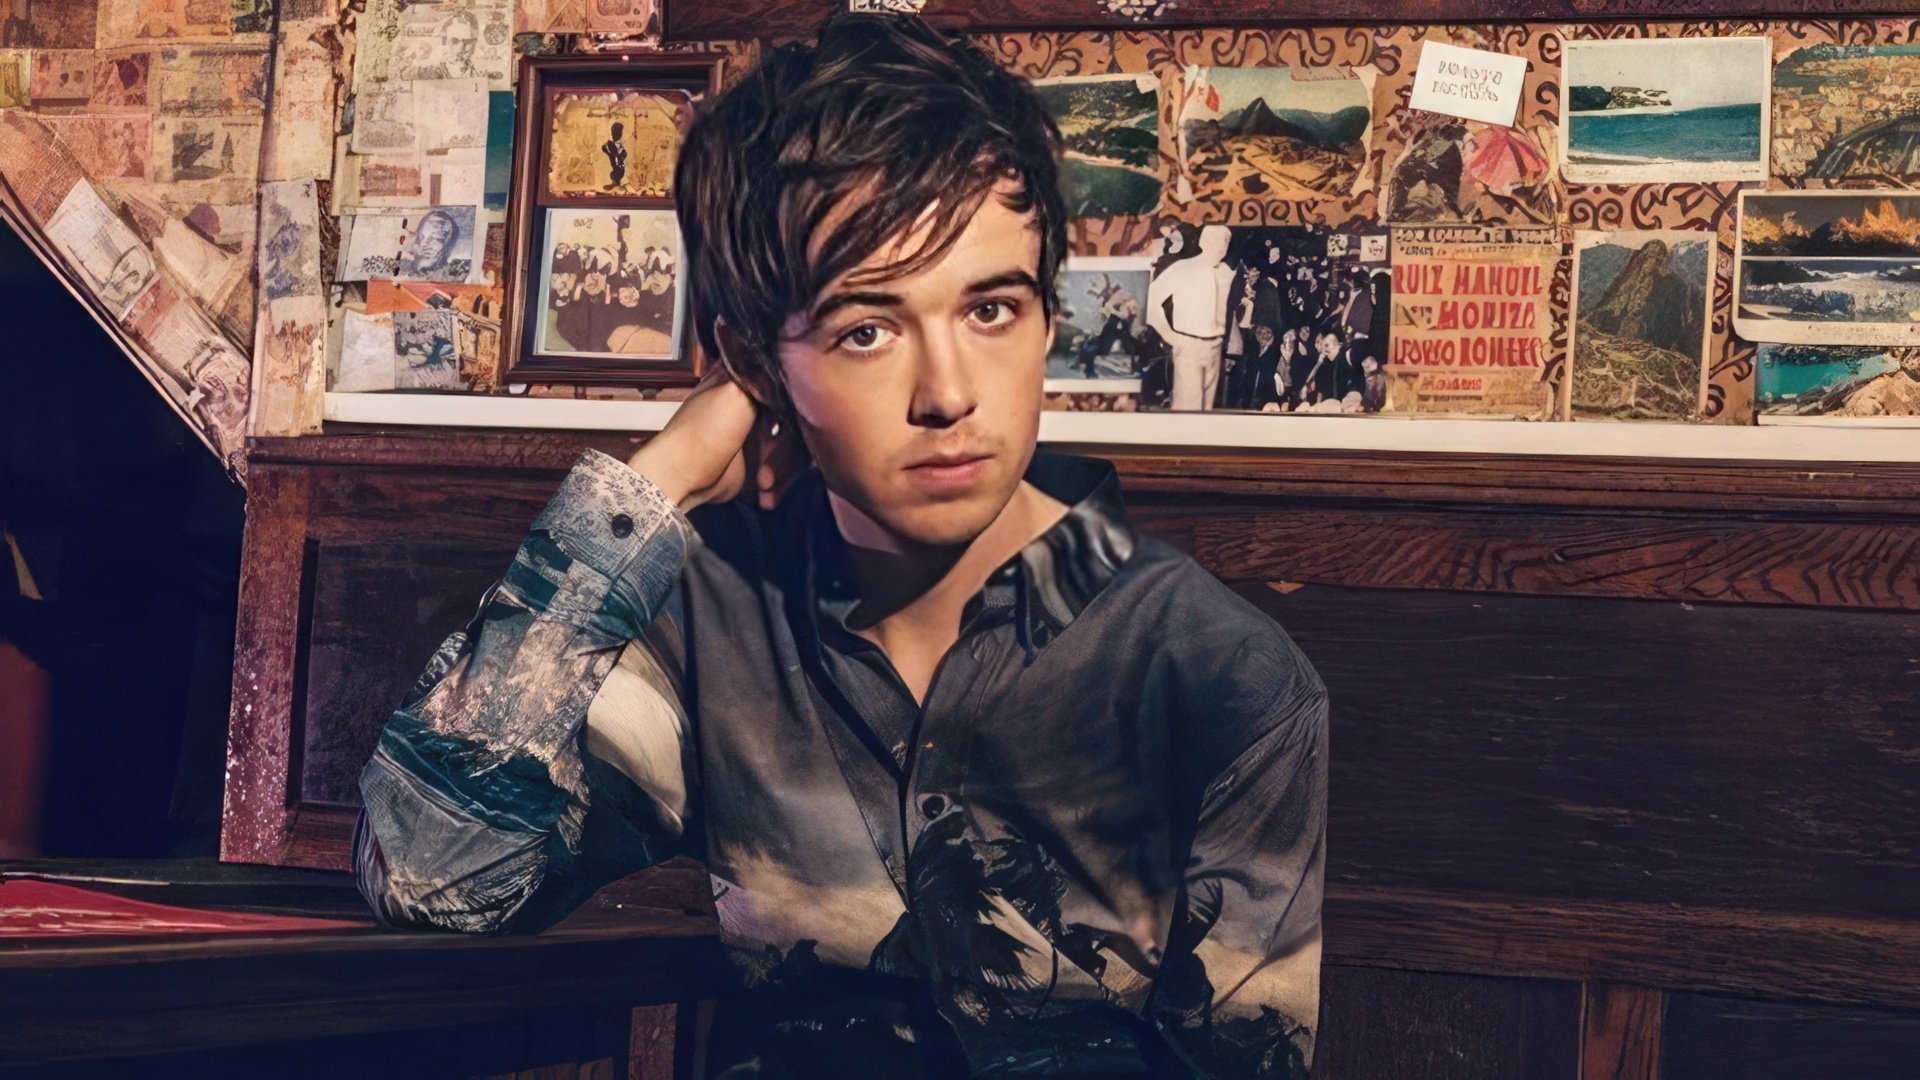 Alex Lawther prefers to keep his personal life private